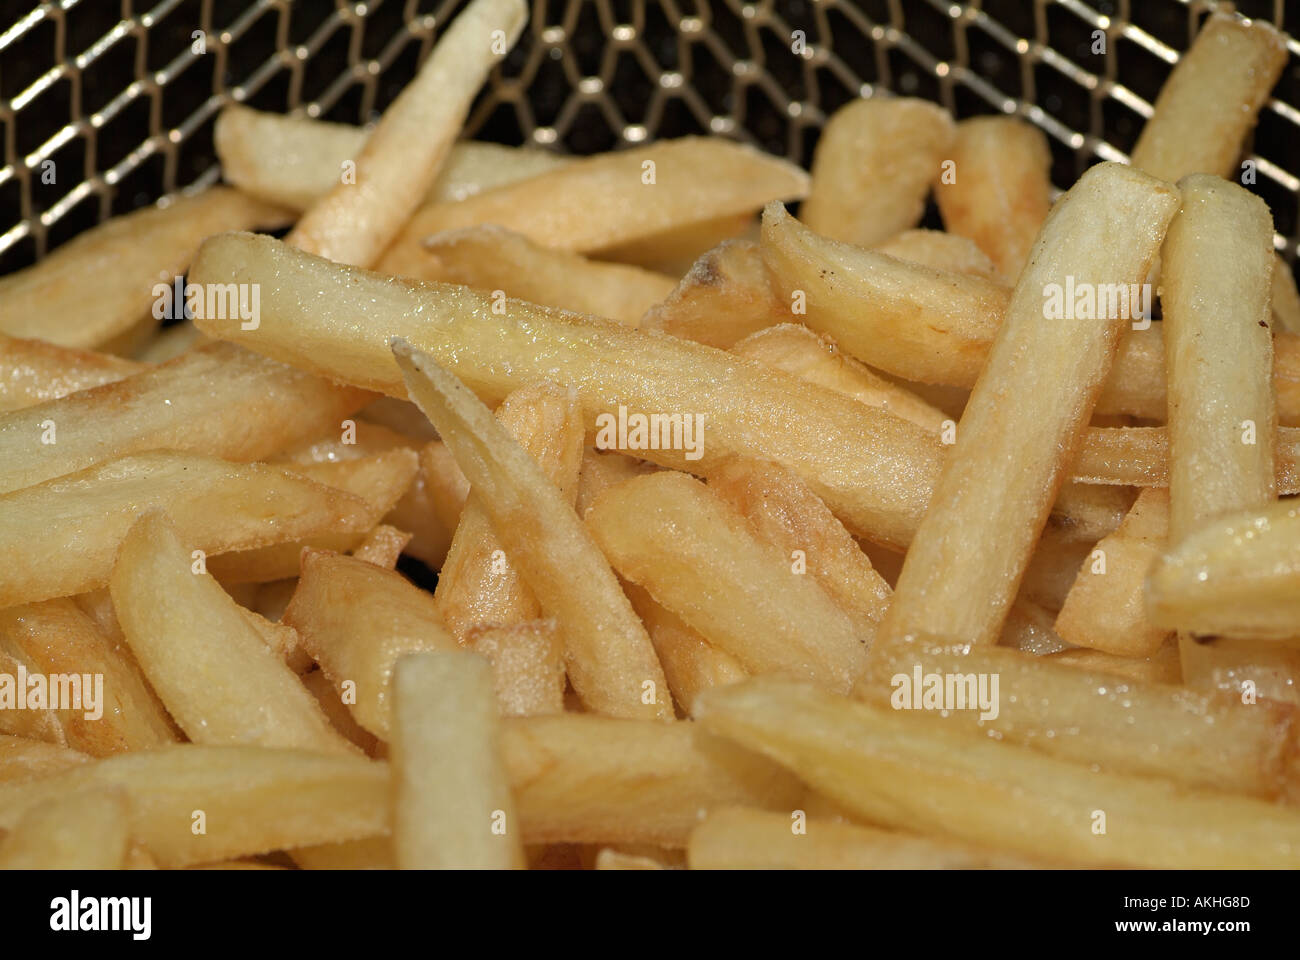 https://c8.alamy.com/comp/AKHG8D/freshly-cooked-chips-in-the-basket-of-a-deep-fat-fryer-AKHG8D.jpg